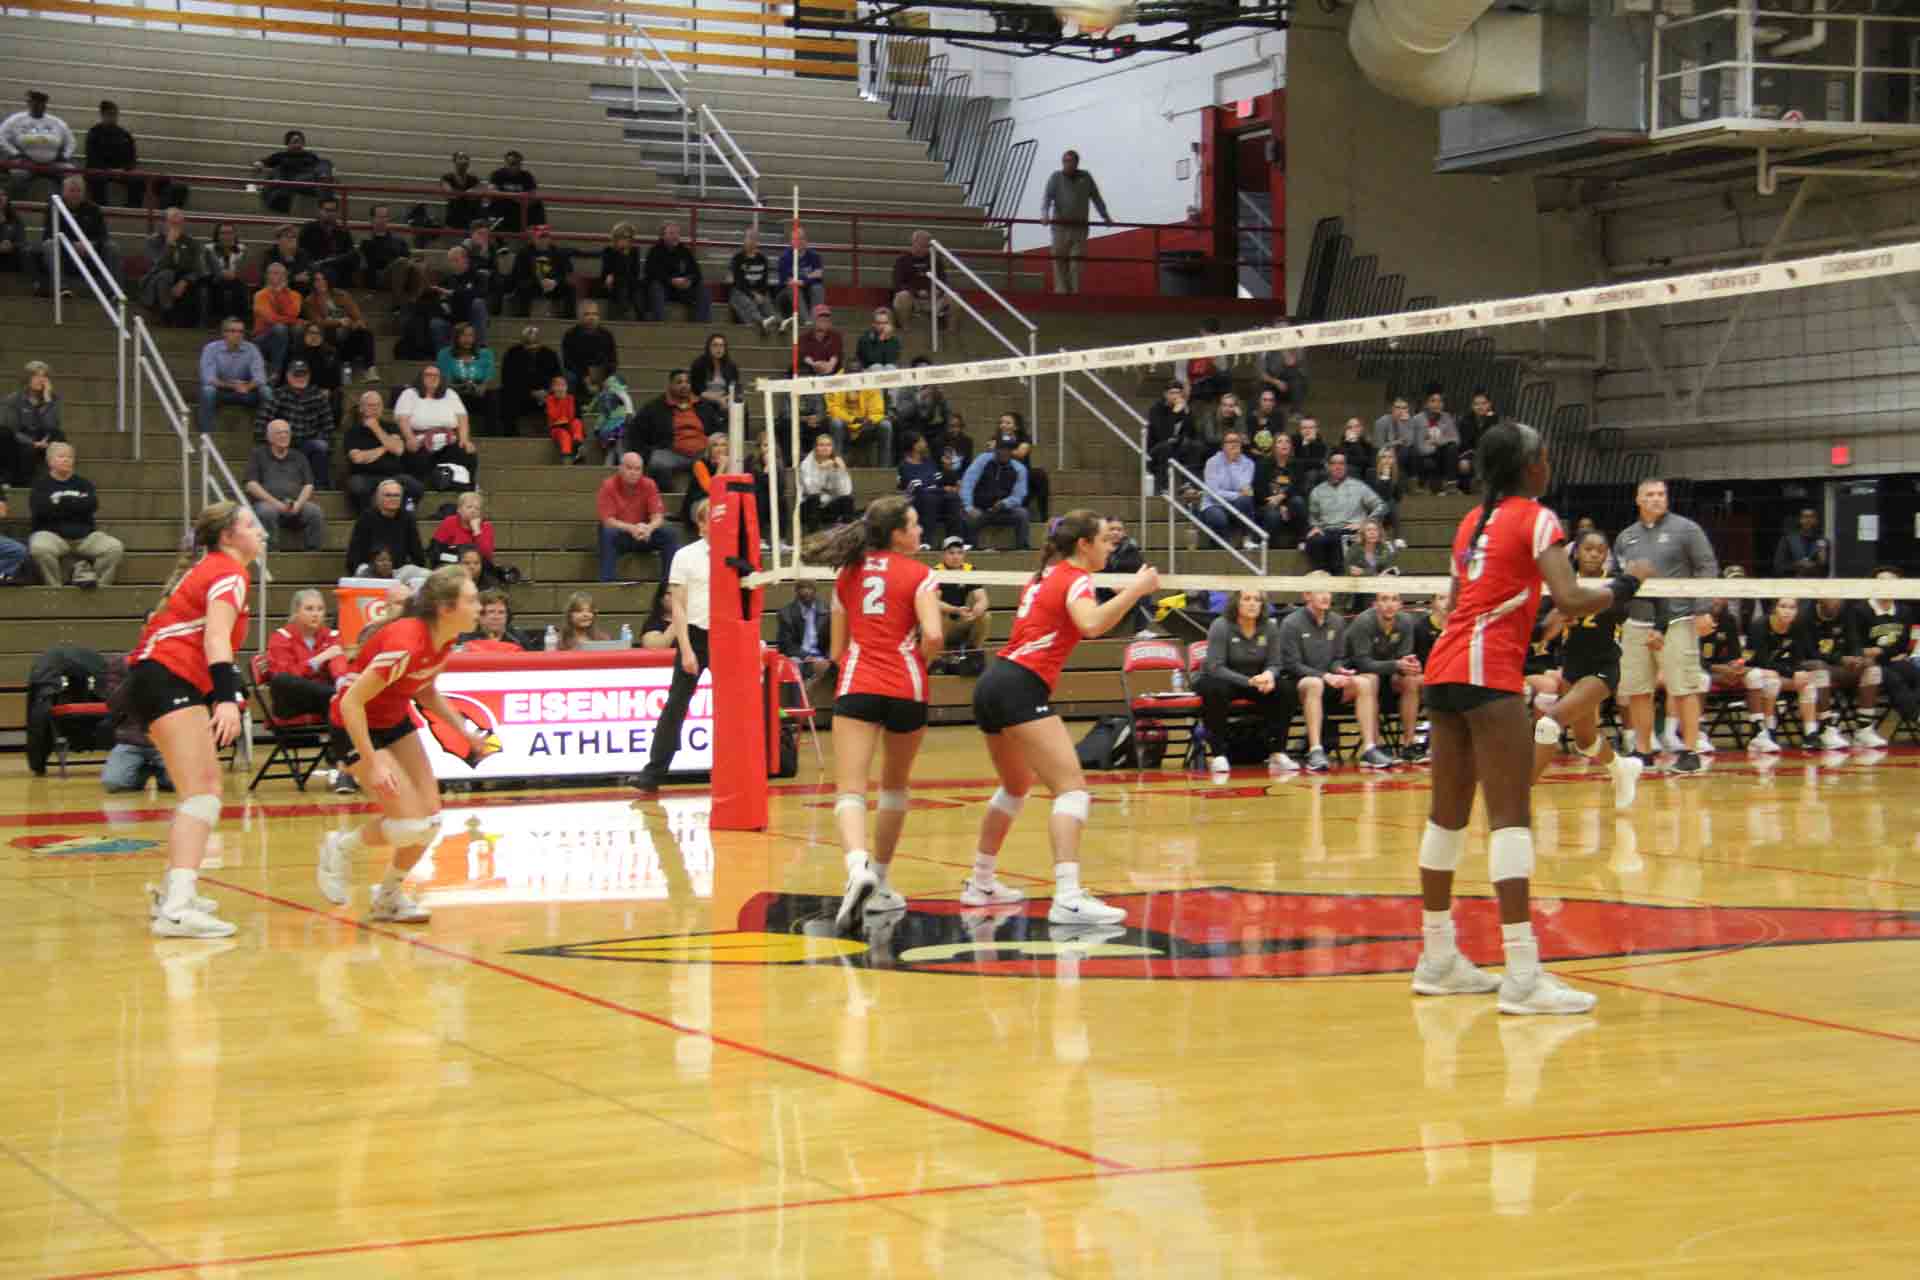 volleyball-sectional-final-vs-marian-catholic-10